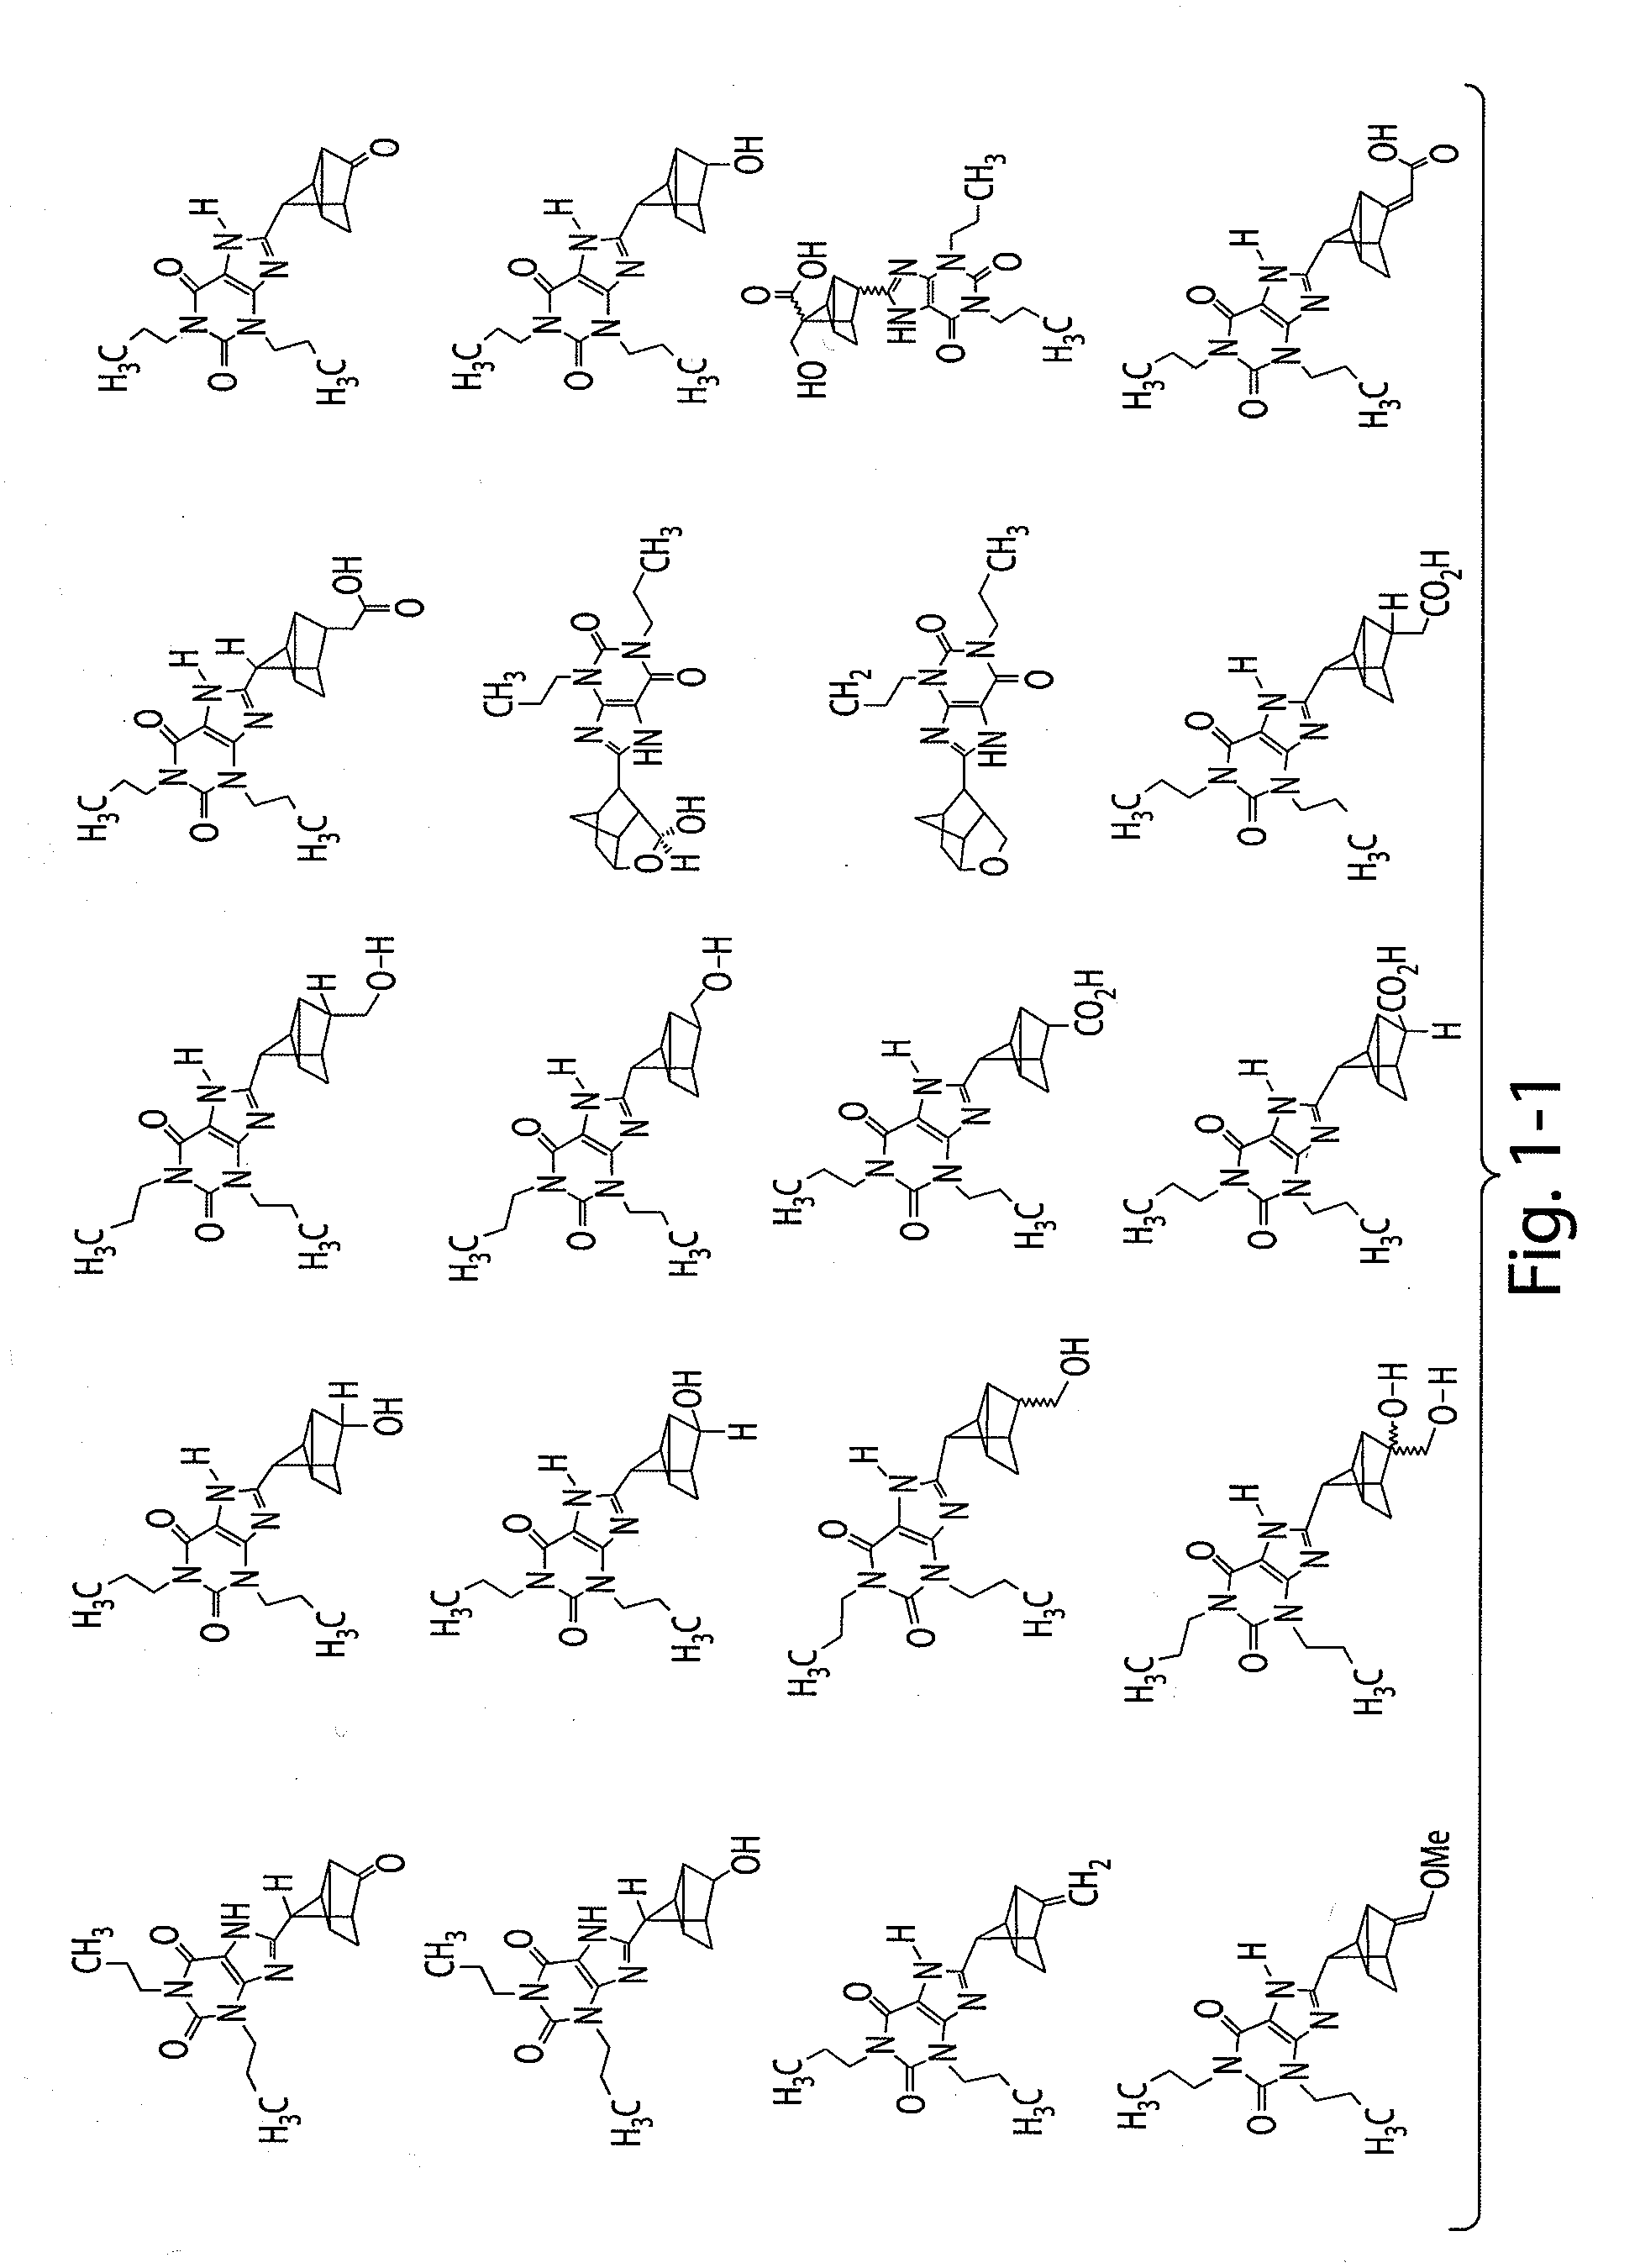 Therapeutic compositions and related methods of use